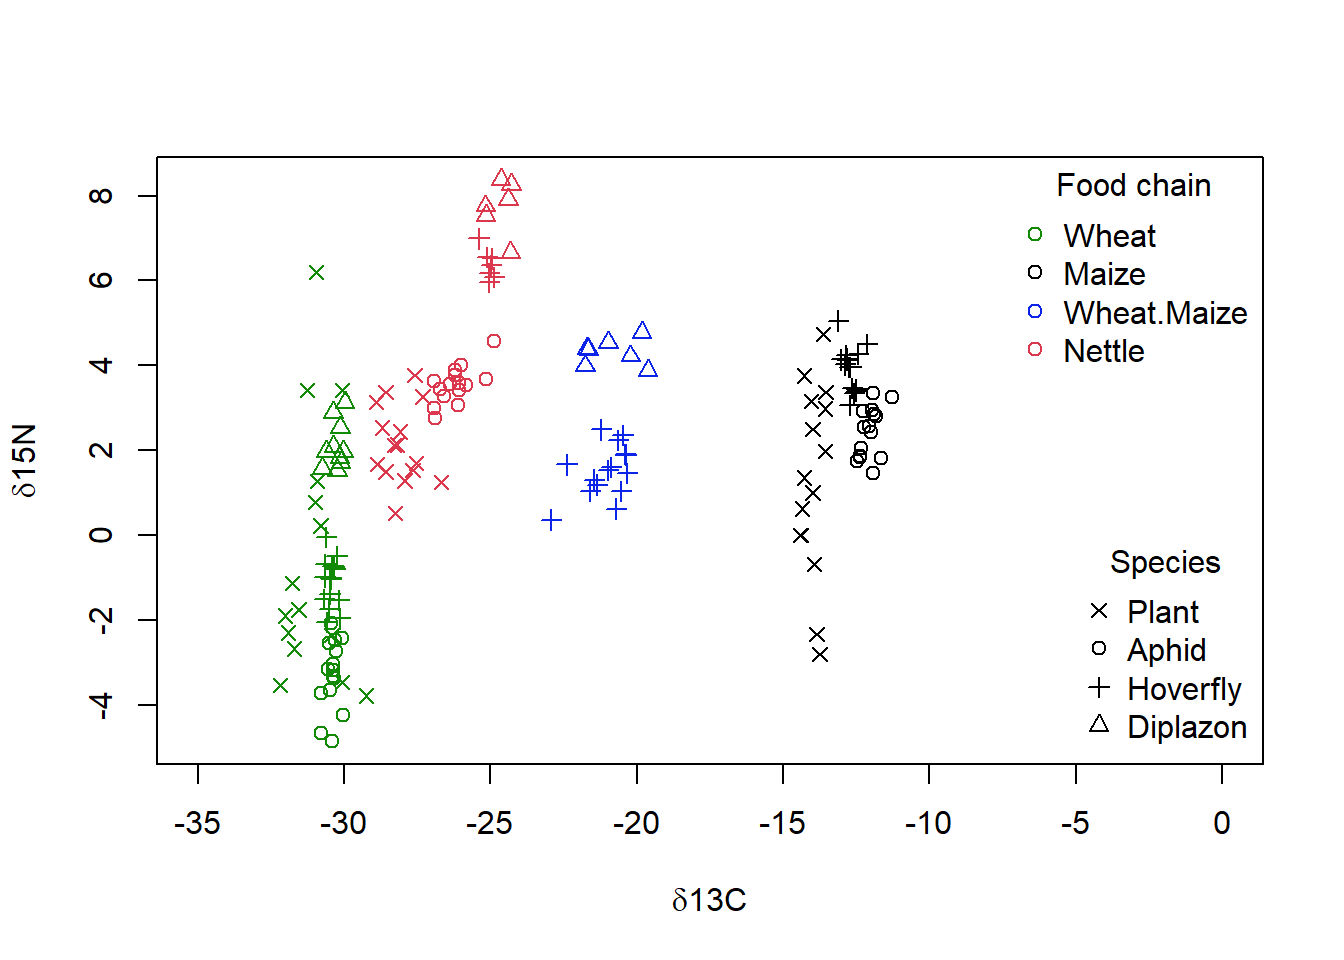 Moving from left to right on the x-axis ('d13C') are groupings for foodwebs with plant species dominated by 'Wheat' 'Nettle', 'Wheat.Maize and 'Maize'. Indicated species are 'Plant', 'Aphid', 'Diplazon' and 'Hoverfly'